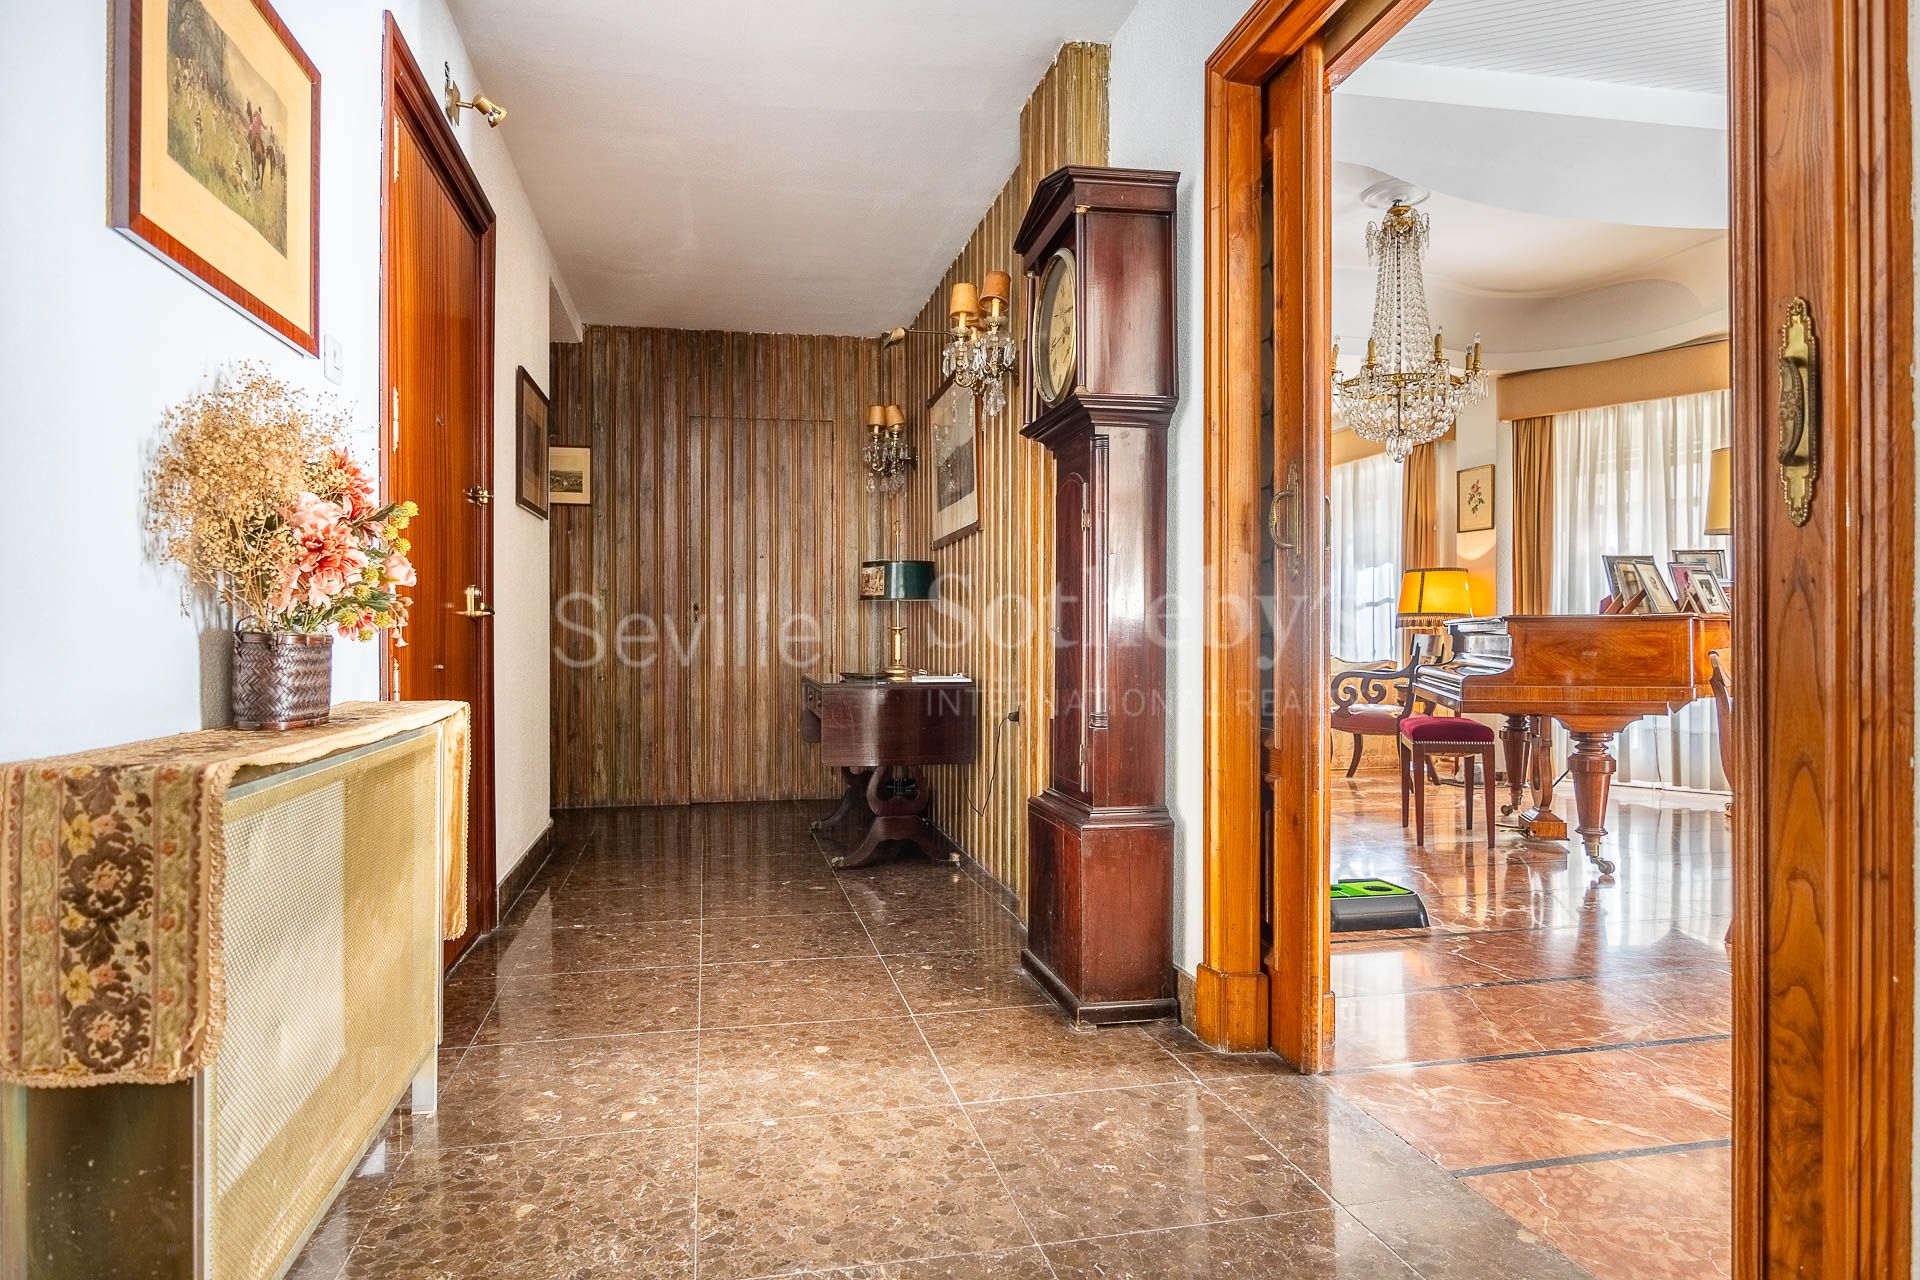 Exclusive 367-square-meter apartment in one of most sought-after areas of Seville